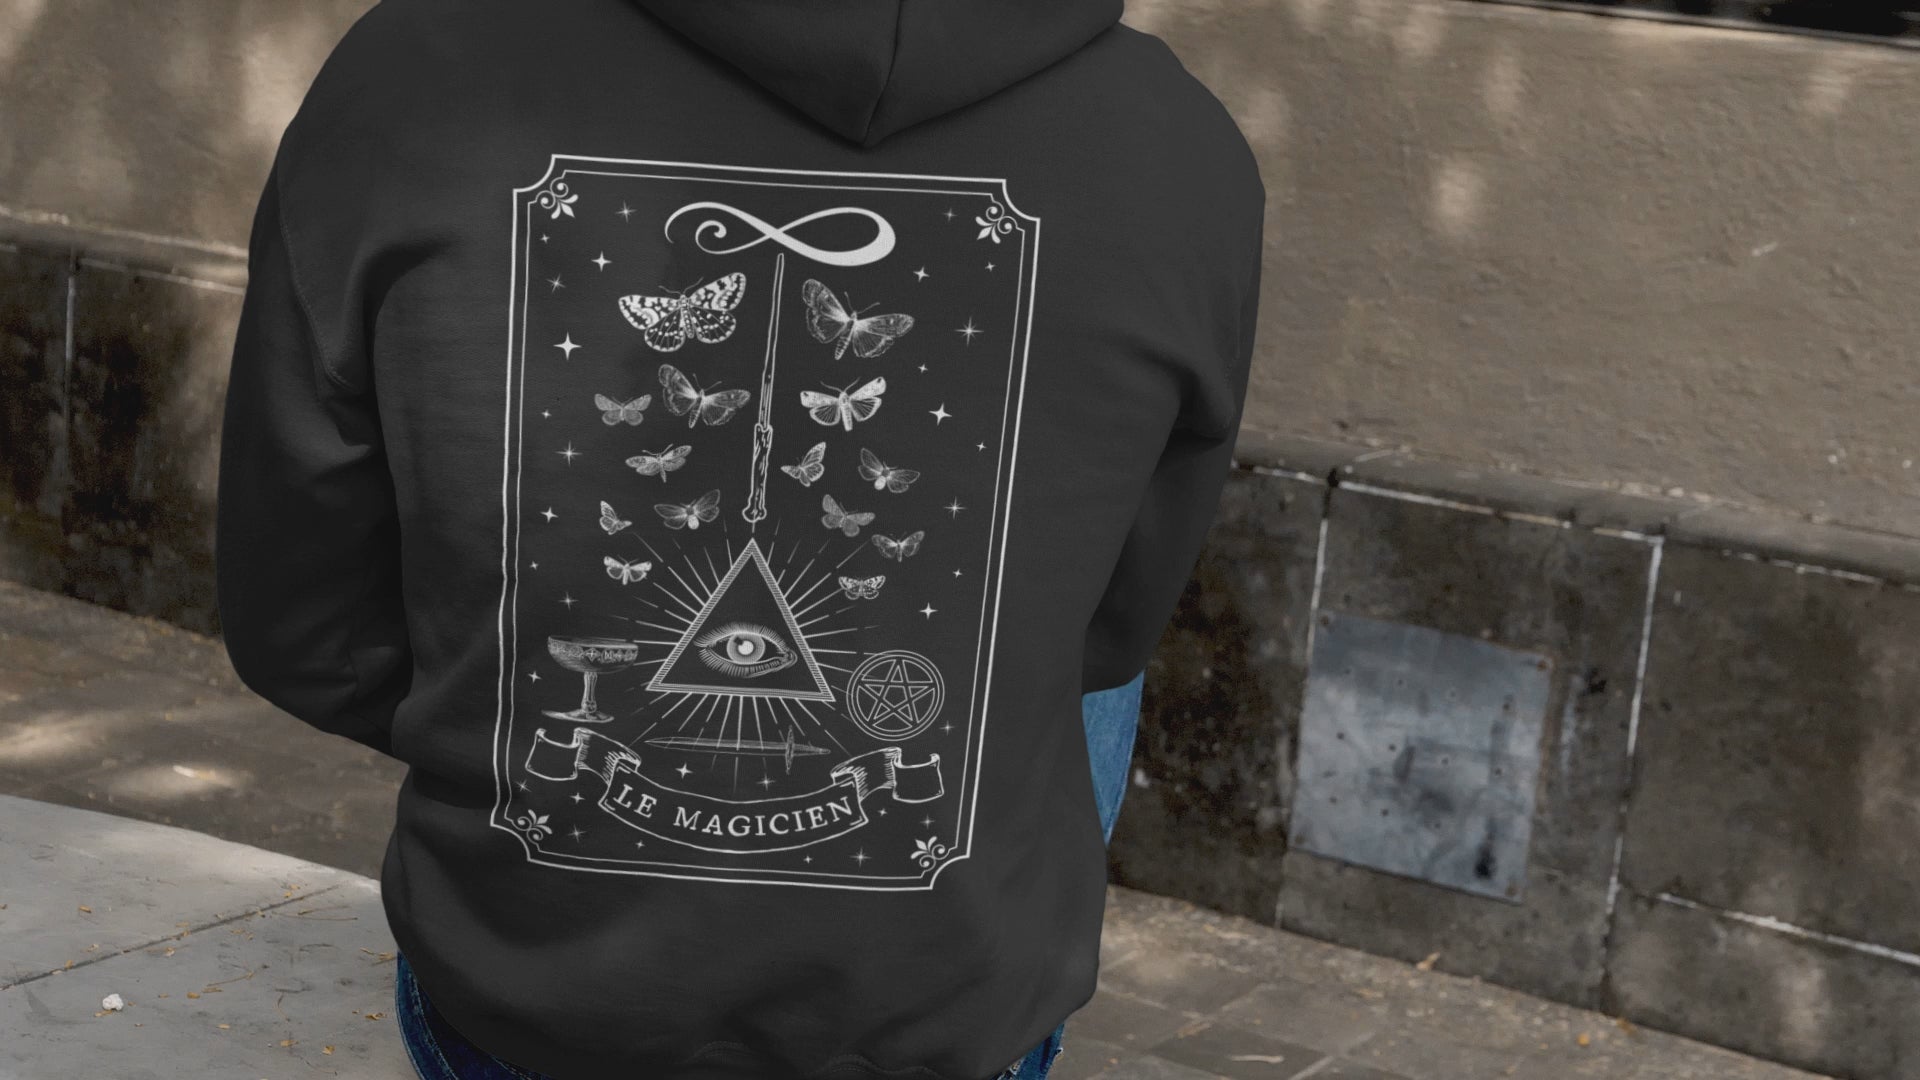 The Magician Tarot Card Witchy Aesthetic Occult Zip Up Hoodie